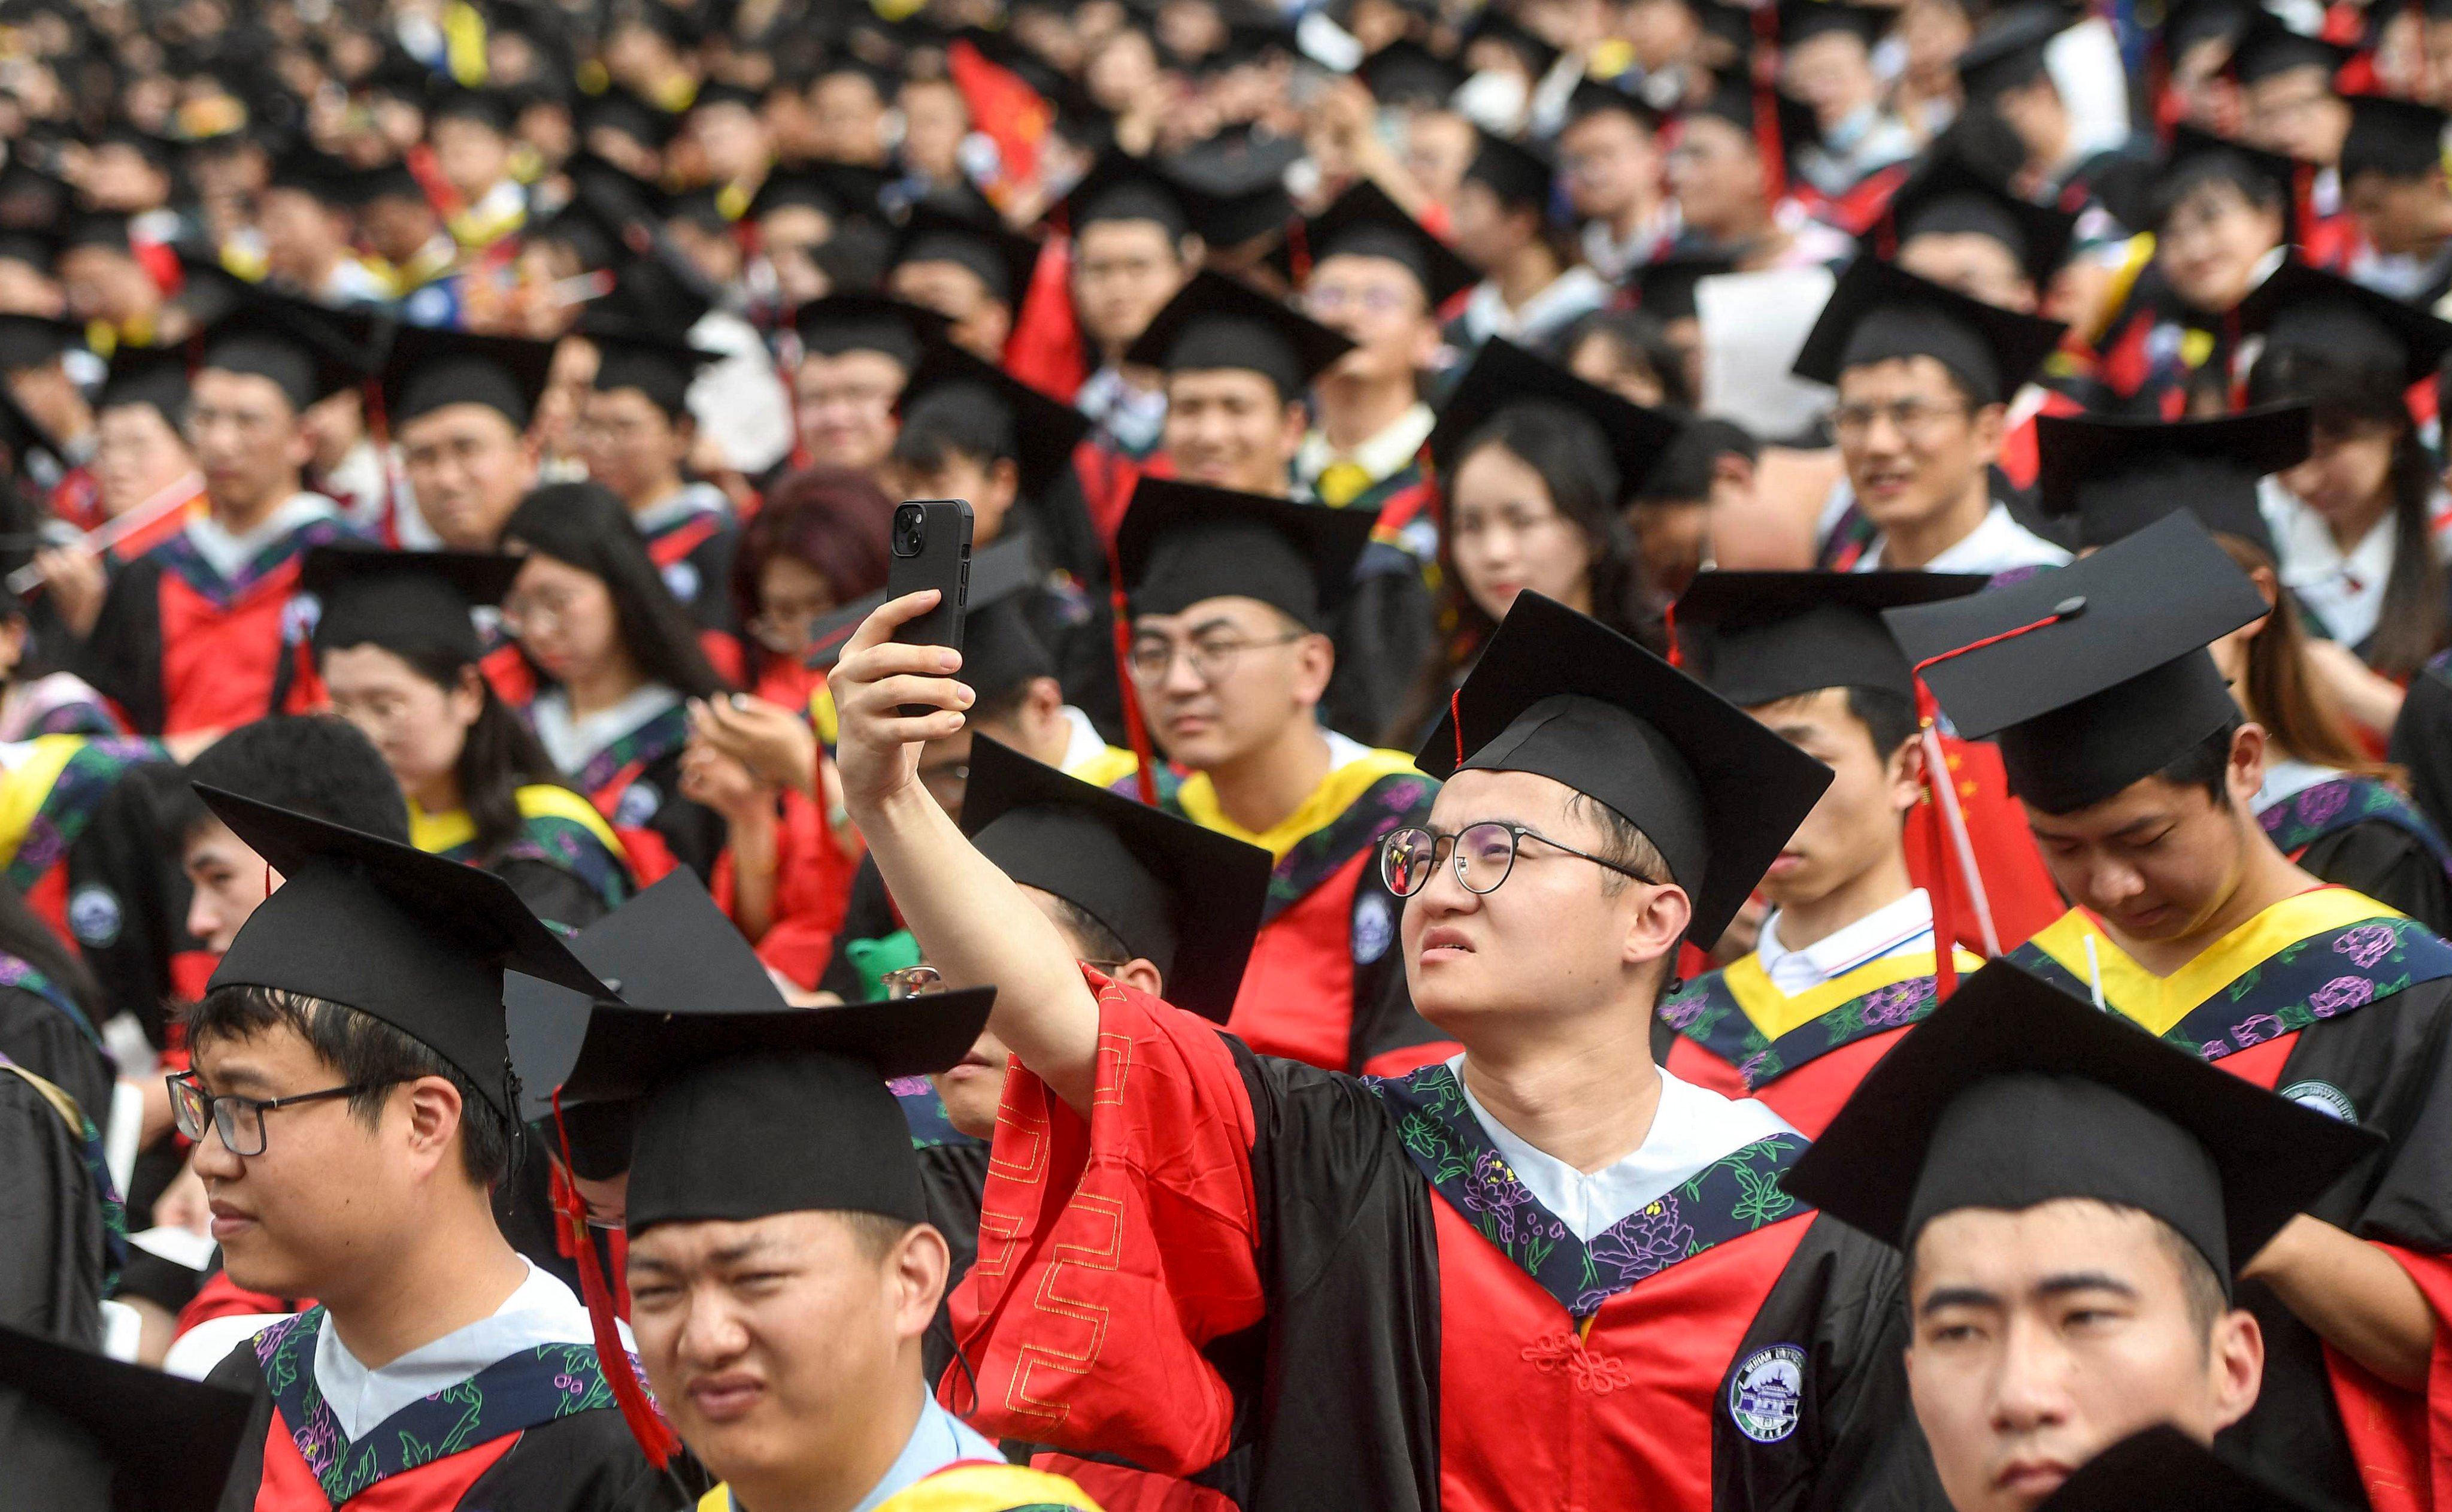 Students at China’s Wuhan University attend a graduation ceremony in June. Photo: AFP